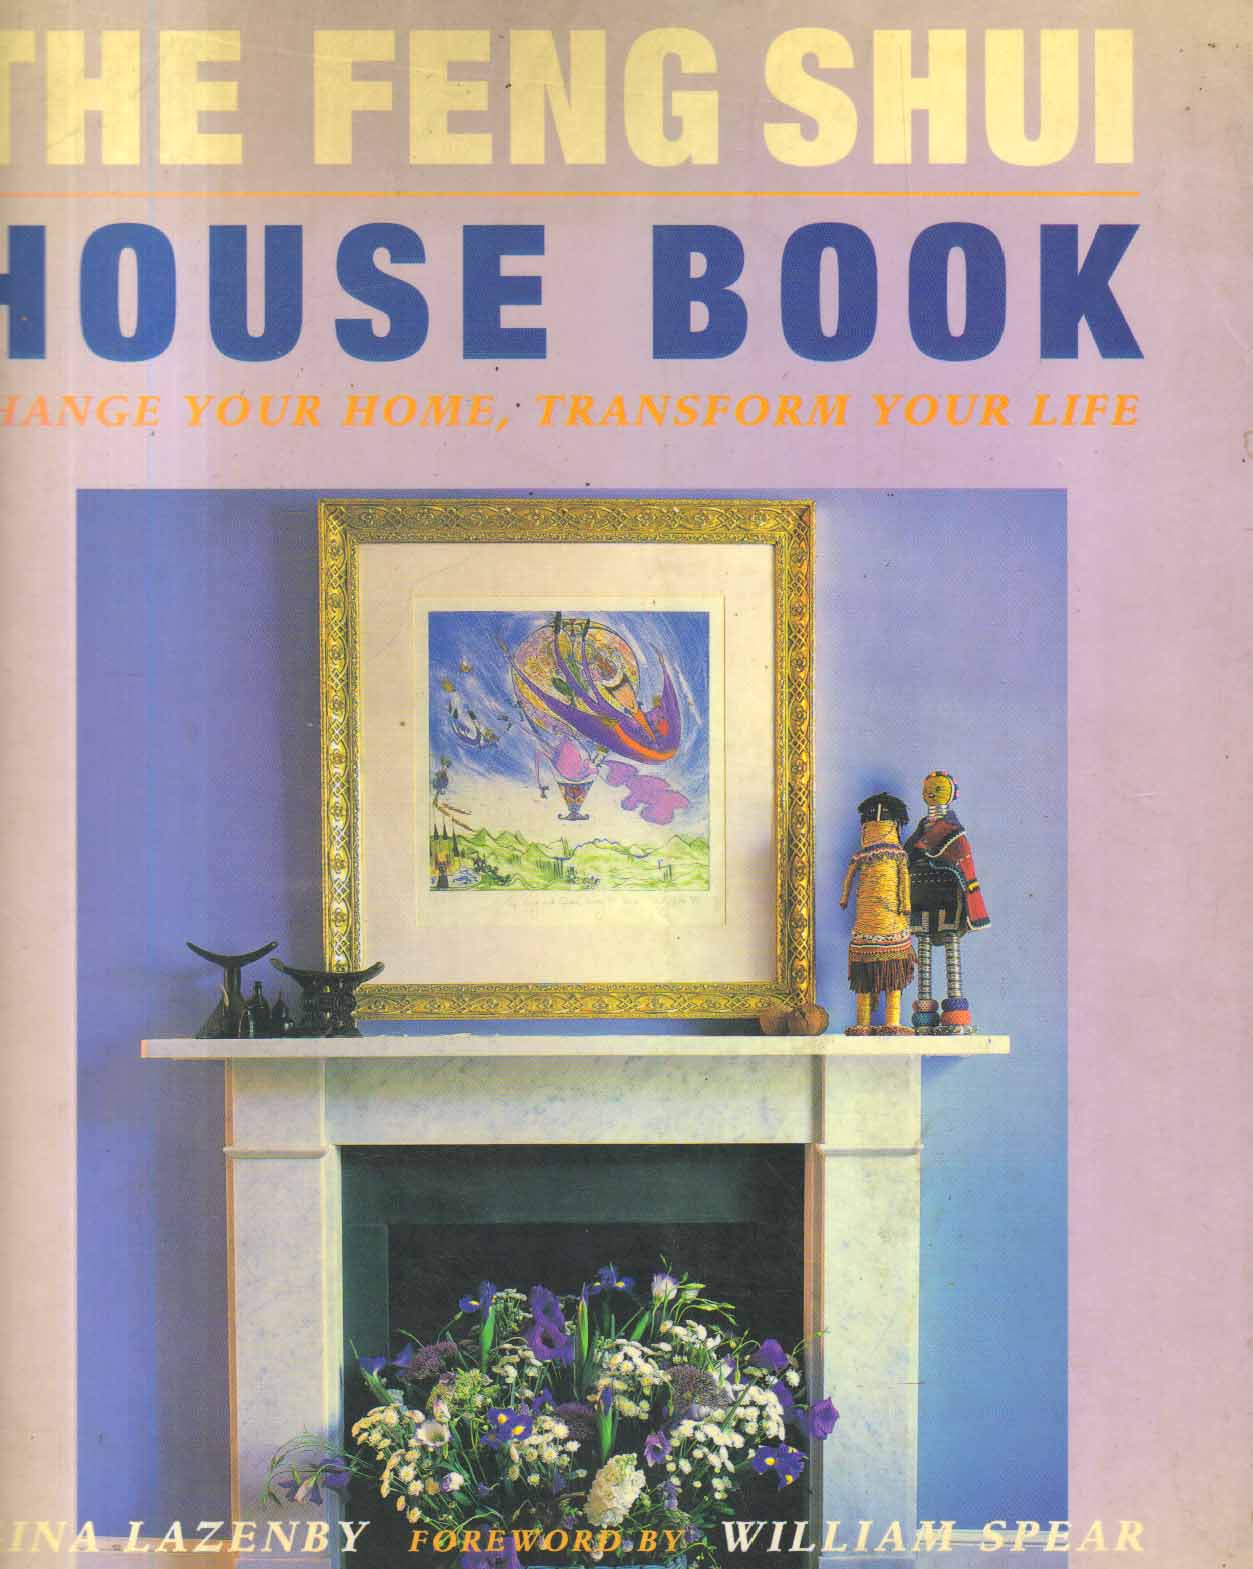 The Fengshui House Book.